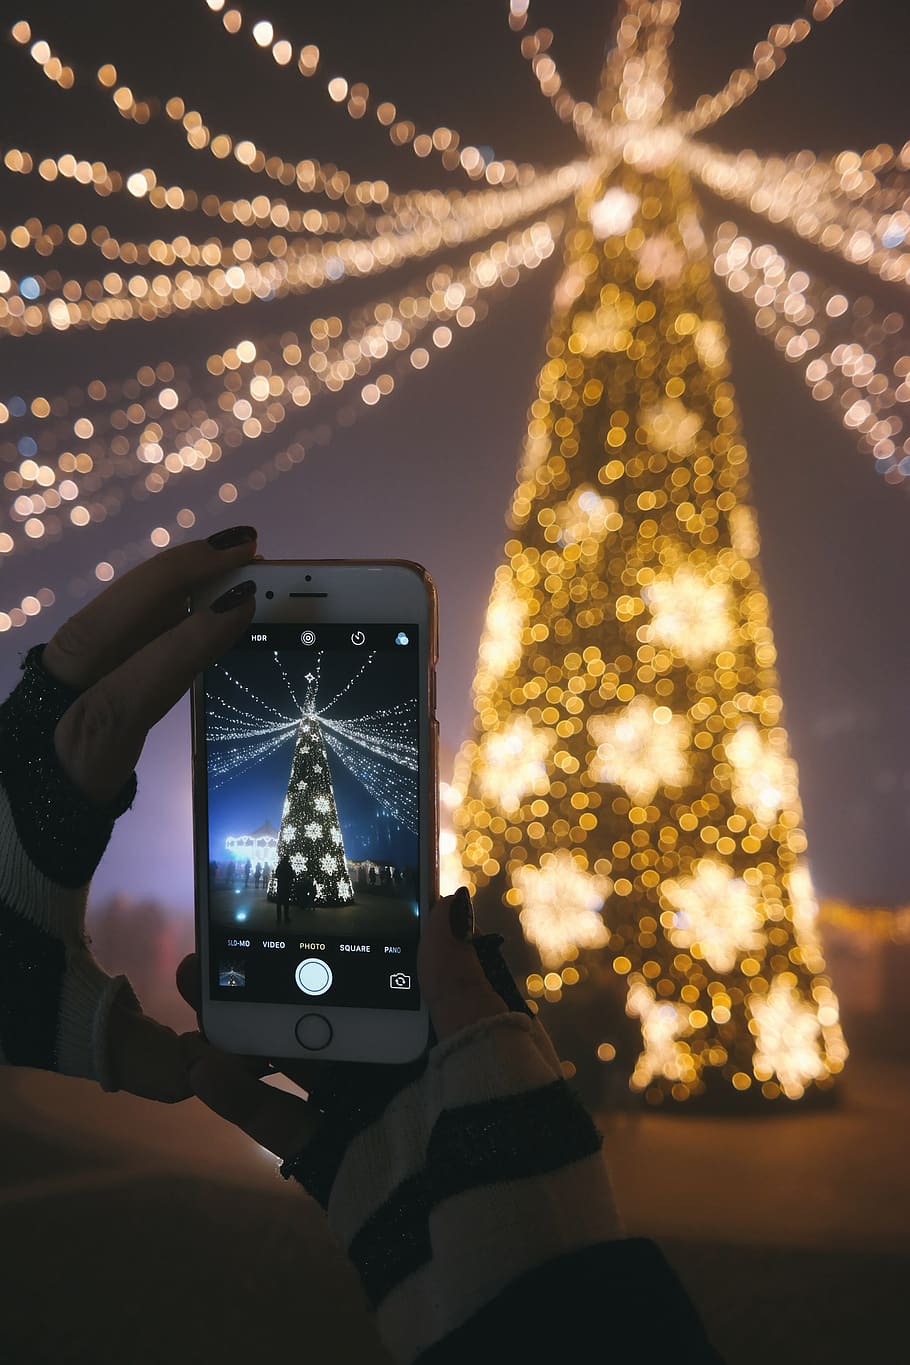 HD wallpaper: A person taking a picture of their Christmas tree with their smartphone